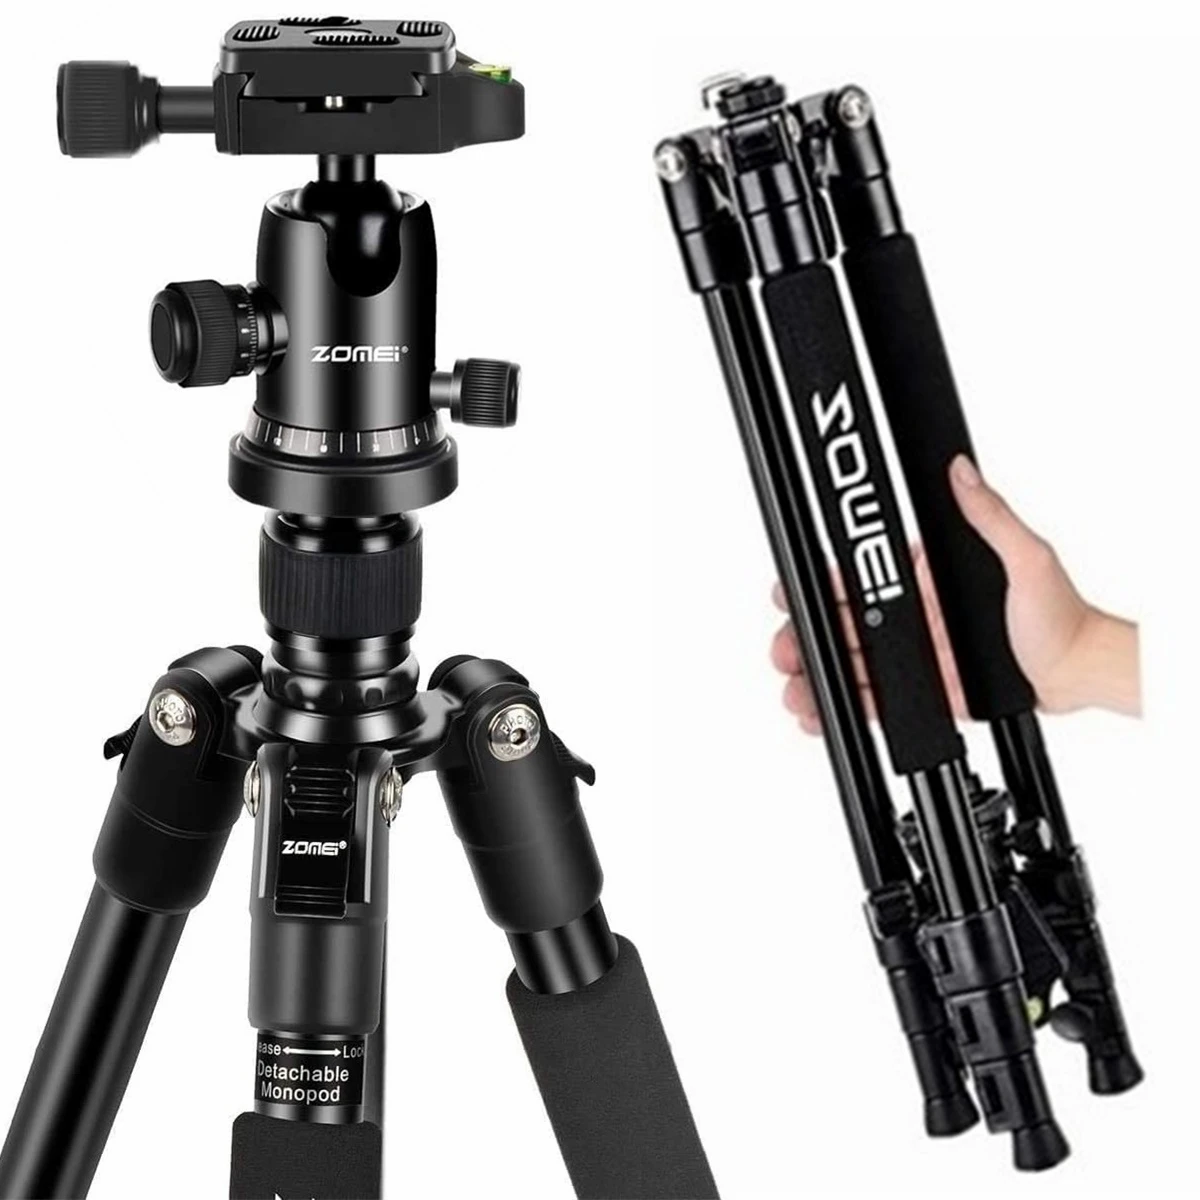 

Lightweight Portable Travel Camera Tripod with Macro Photography, 158.7cm 62.5in Tall, Max Load 8kg/18 Lbs, Aluminum Alloy Stand